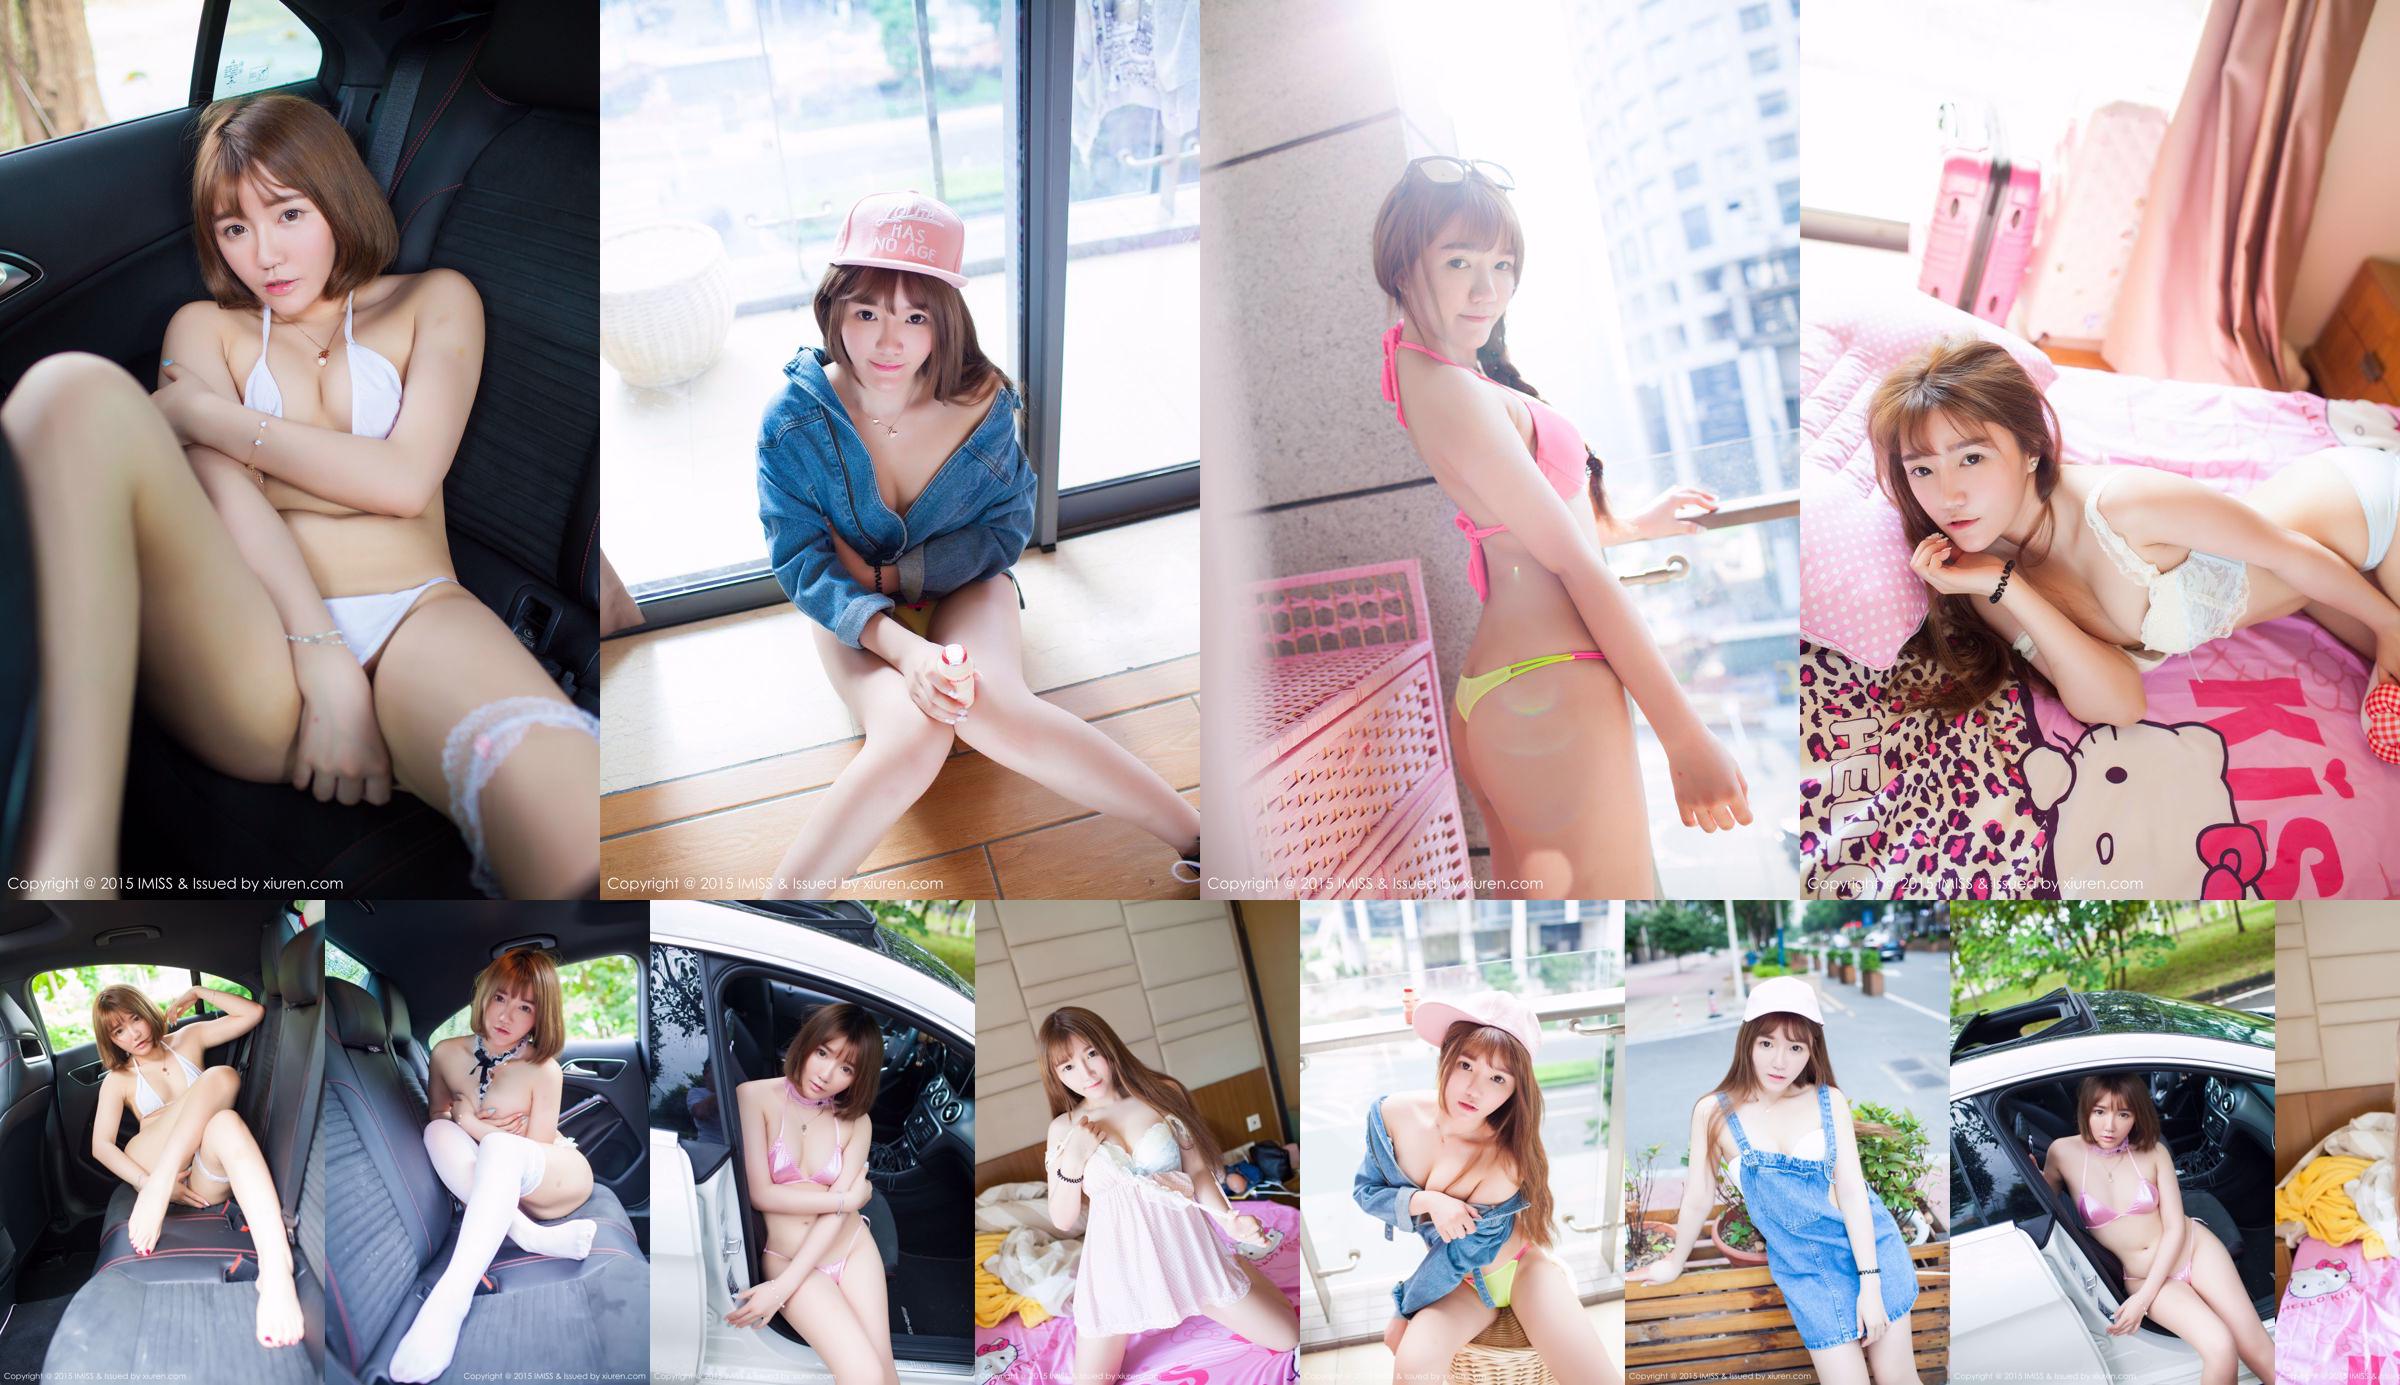 Xiaobaojiang "The Temptation of Outdoor Car Shooting White Stockings" [IMiss] Vol.056 No.af49ff หน้า 5